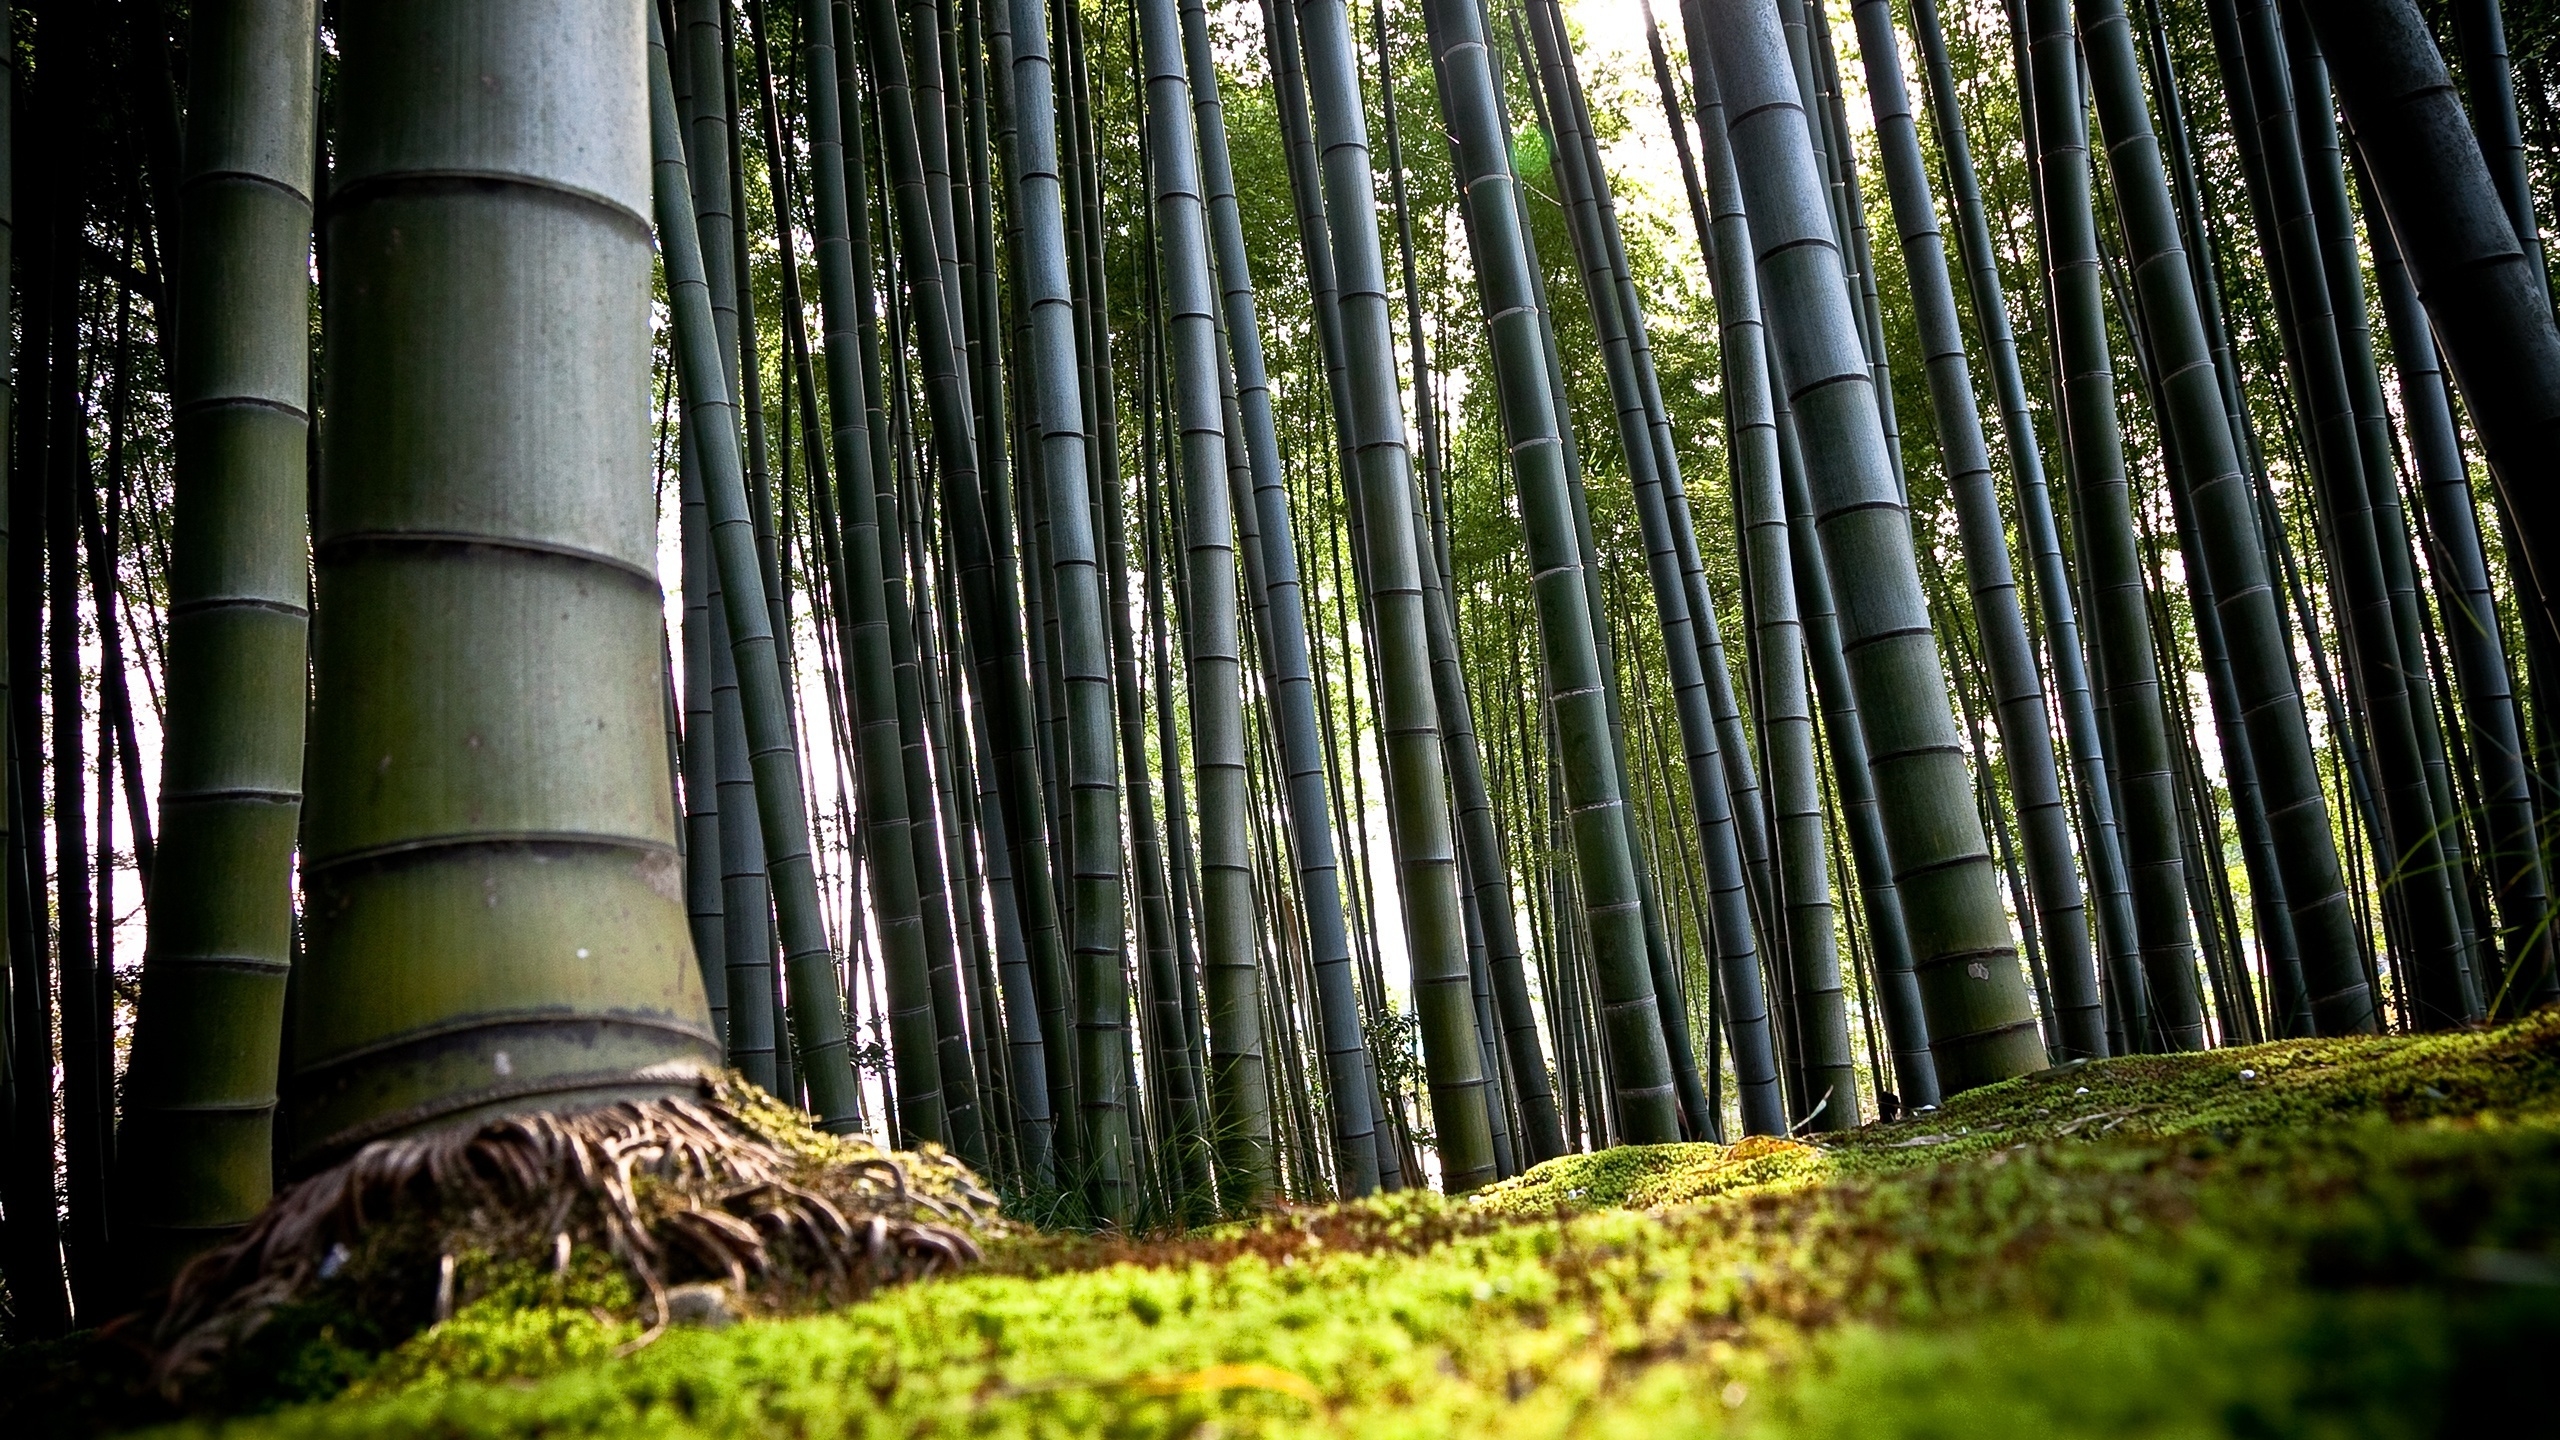 Forest Bamboo for 2560x1440 HDTV resolution